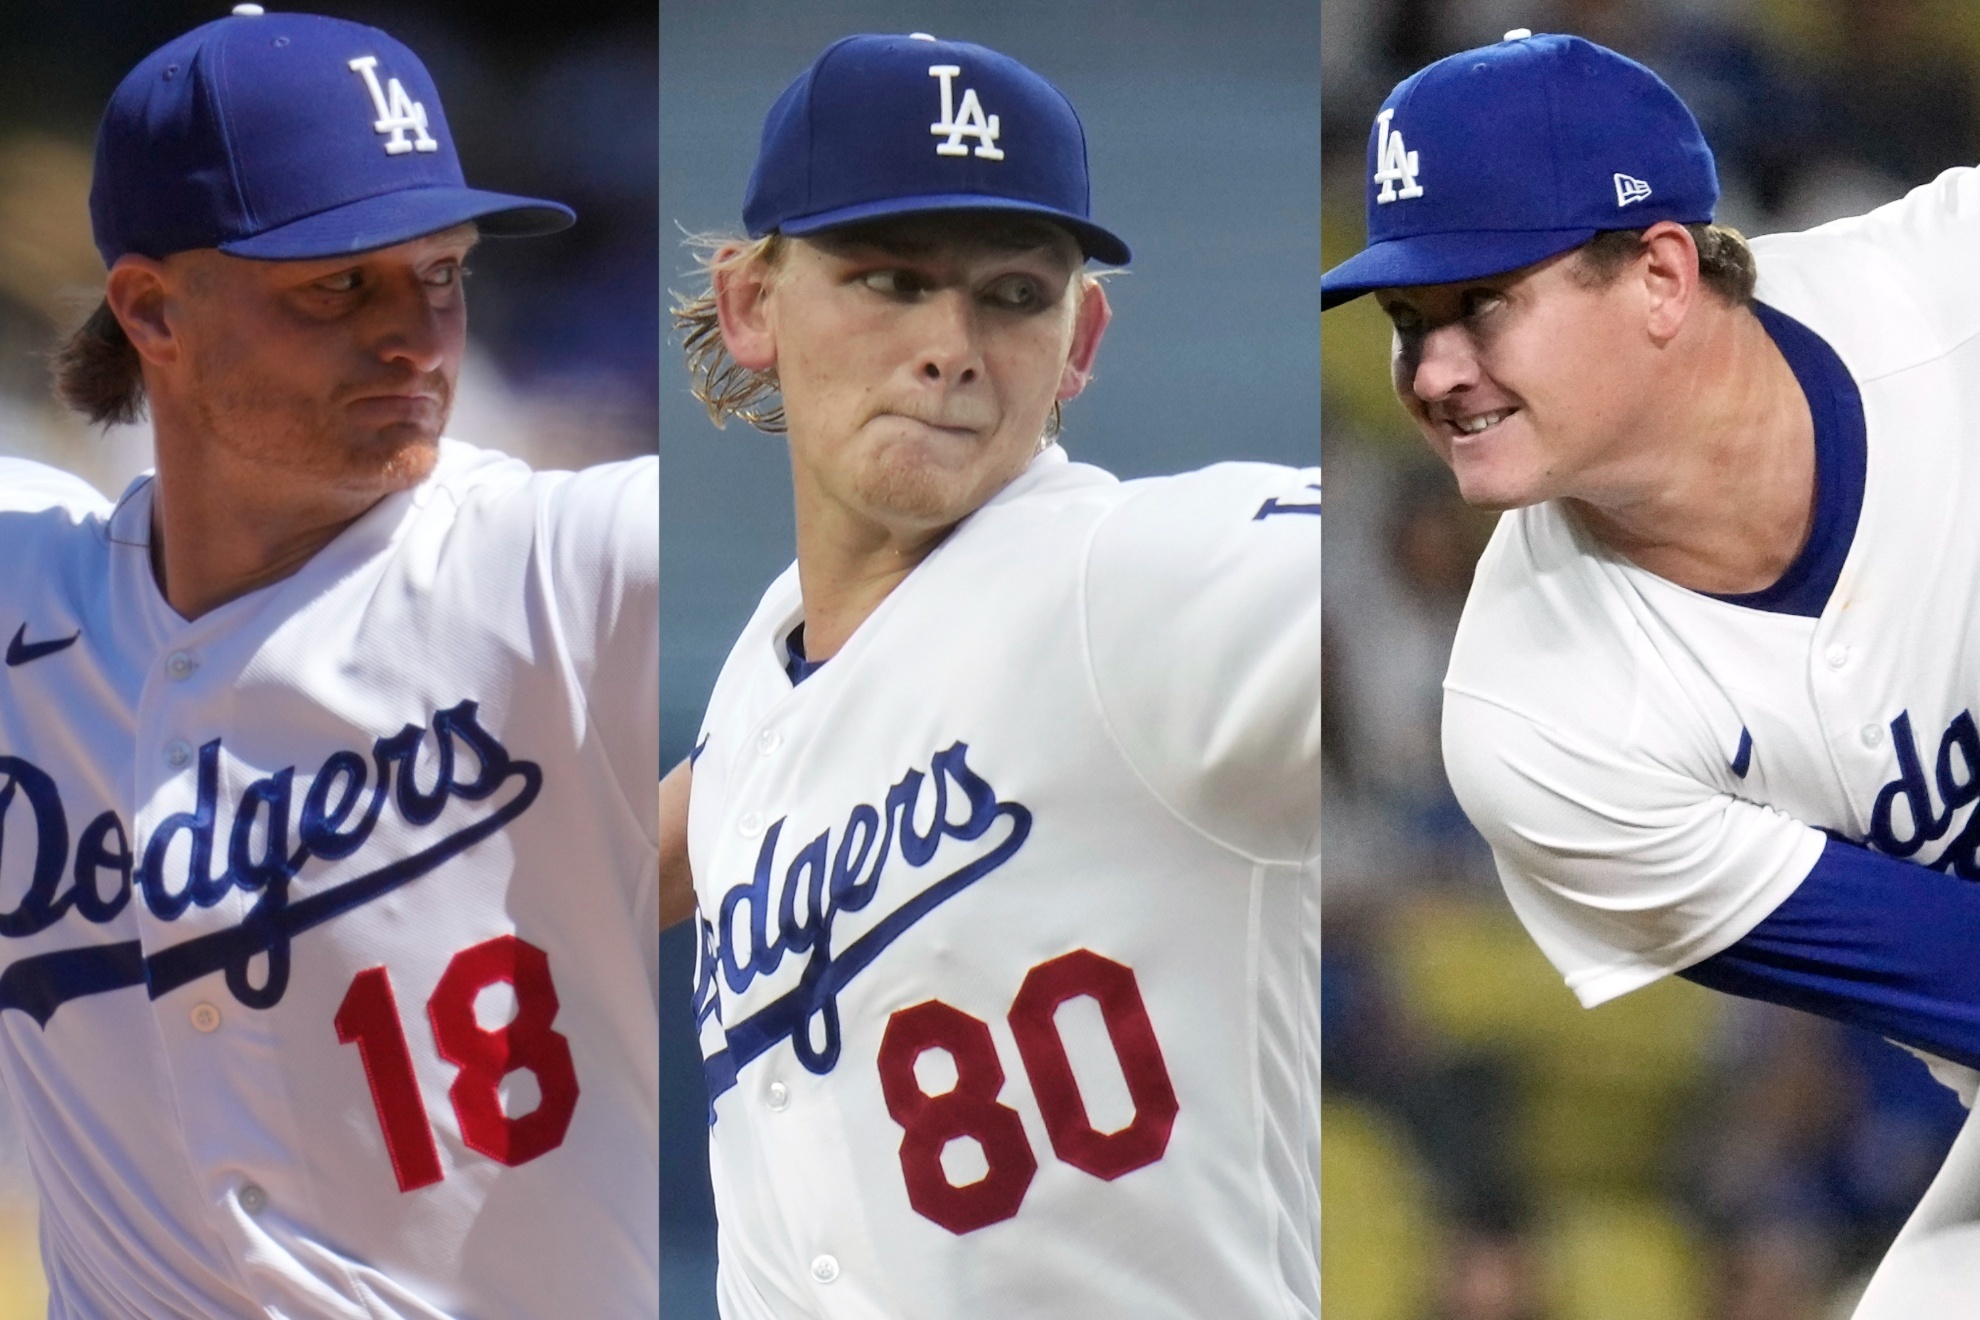 Los Angeles Dodgers pitchers, Shelby Miller (left), Emmet Sheehan (center) and Kyle Hurt (right).